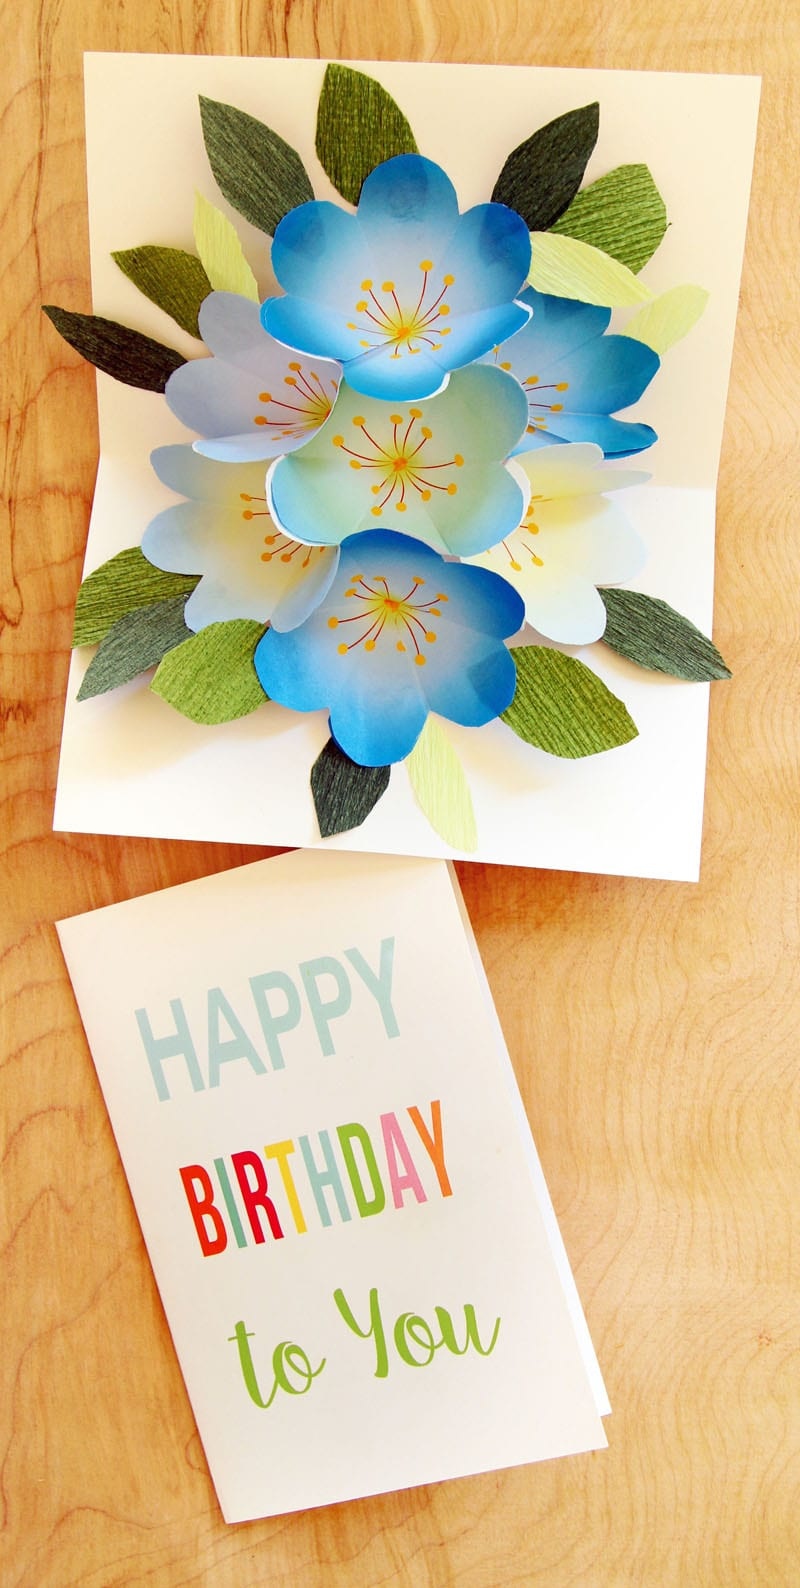 Free Printable Happy Birthday Card With Pop Up Bouquet - A Piece Of - Free Printable Pop Up Card Templates